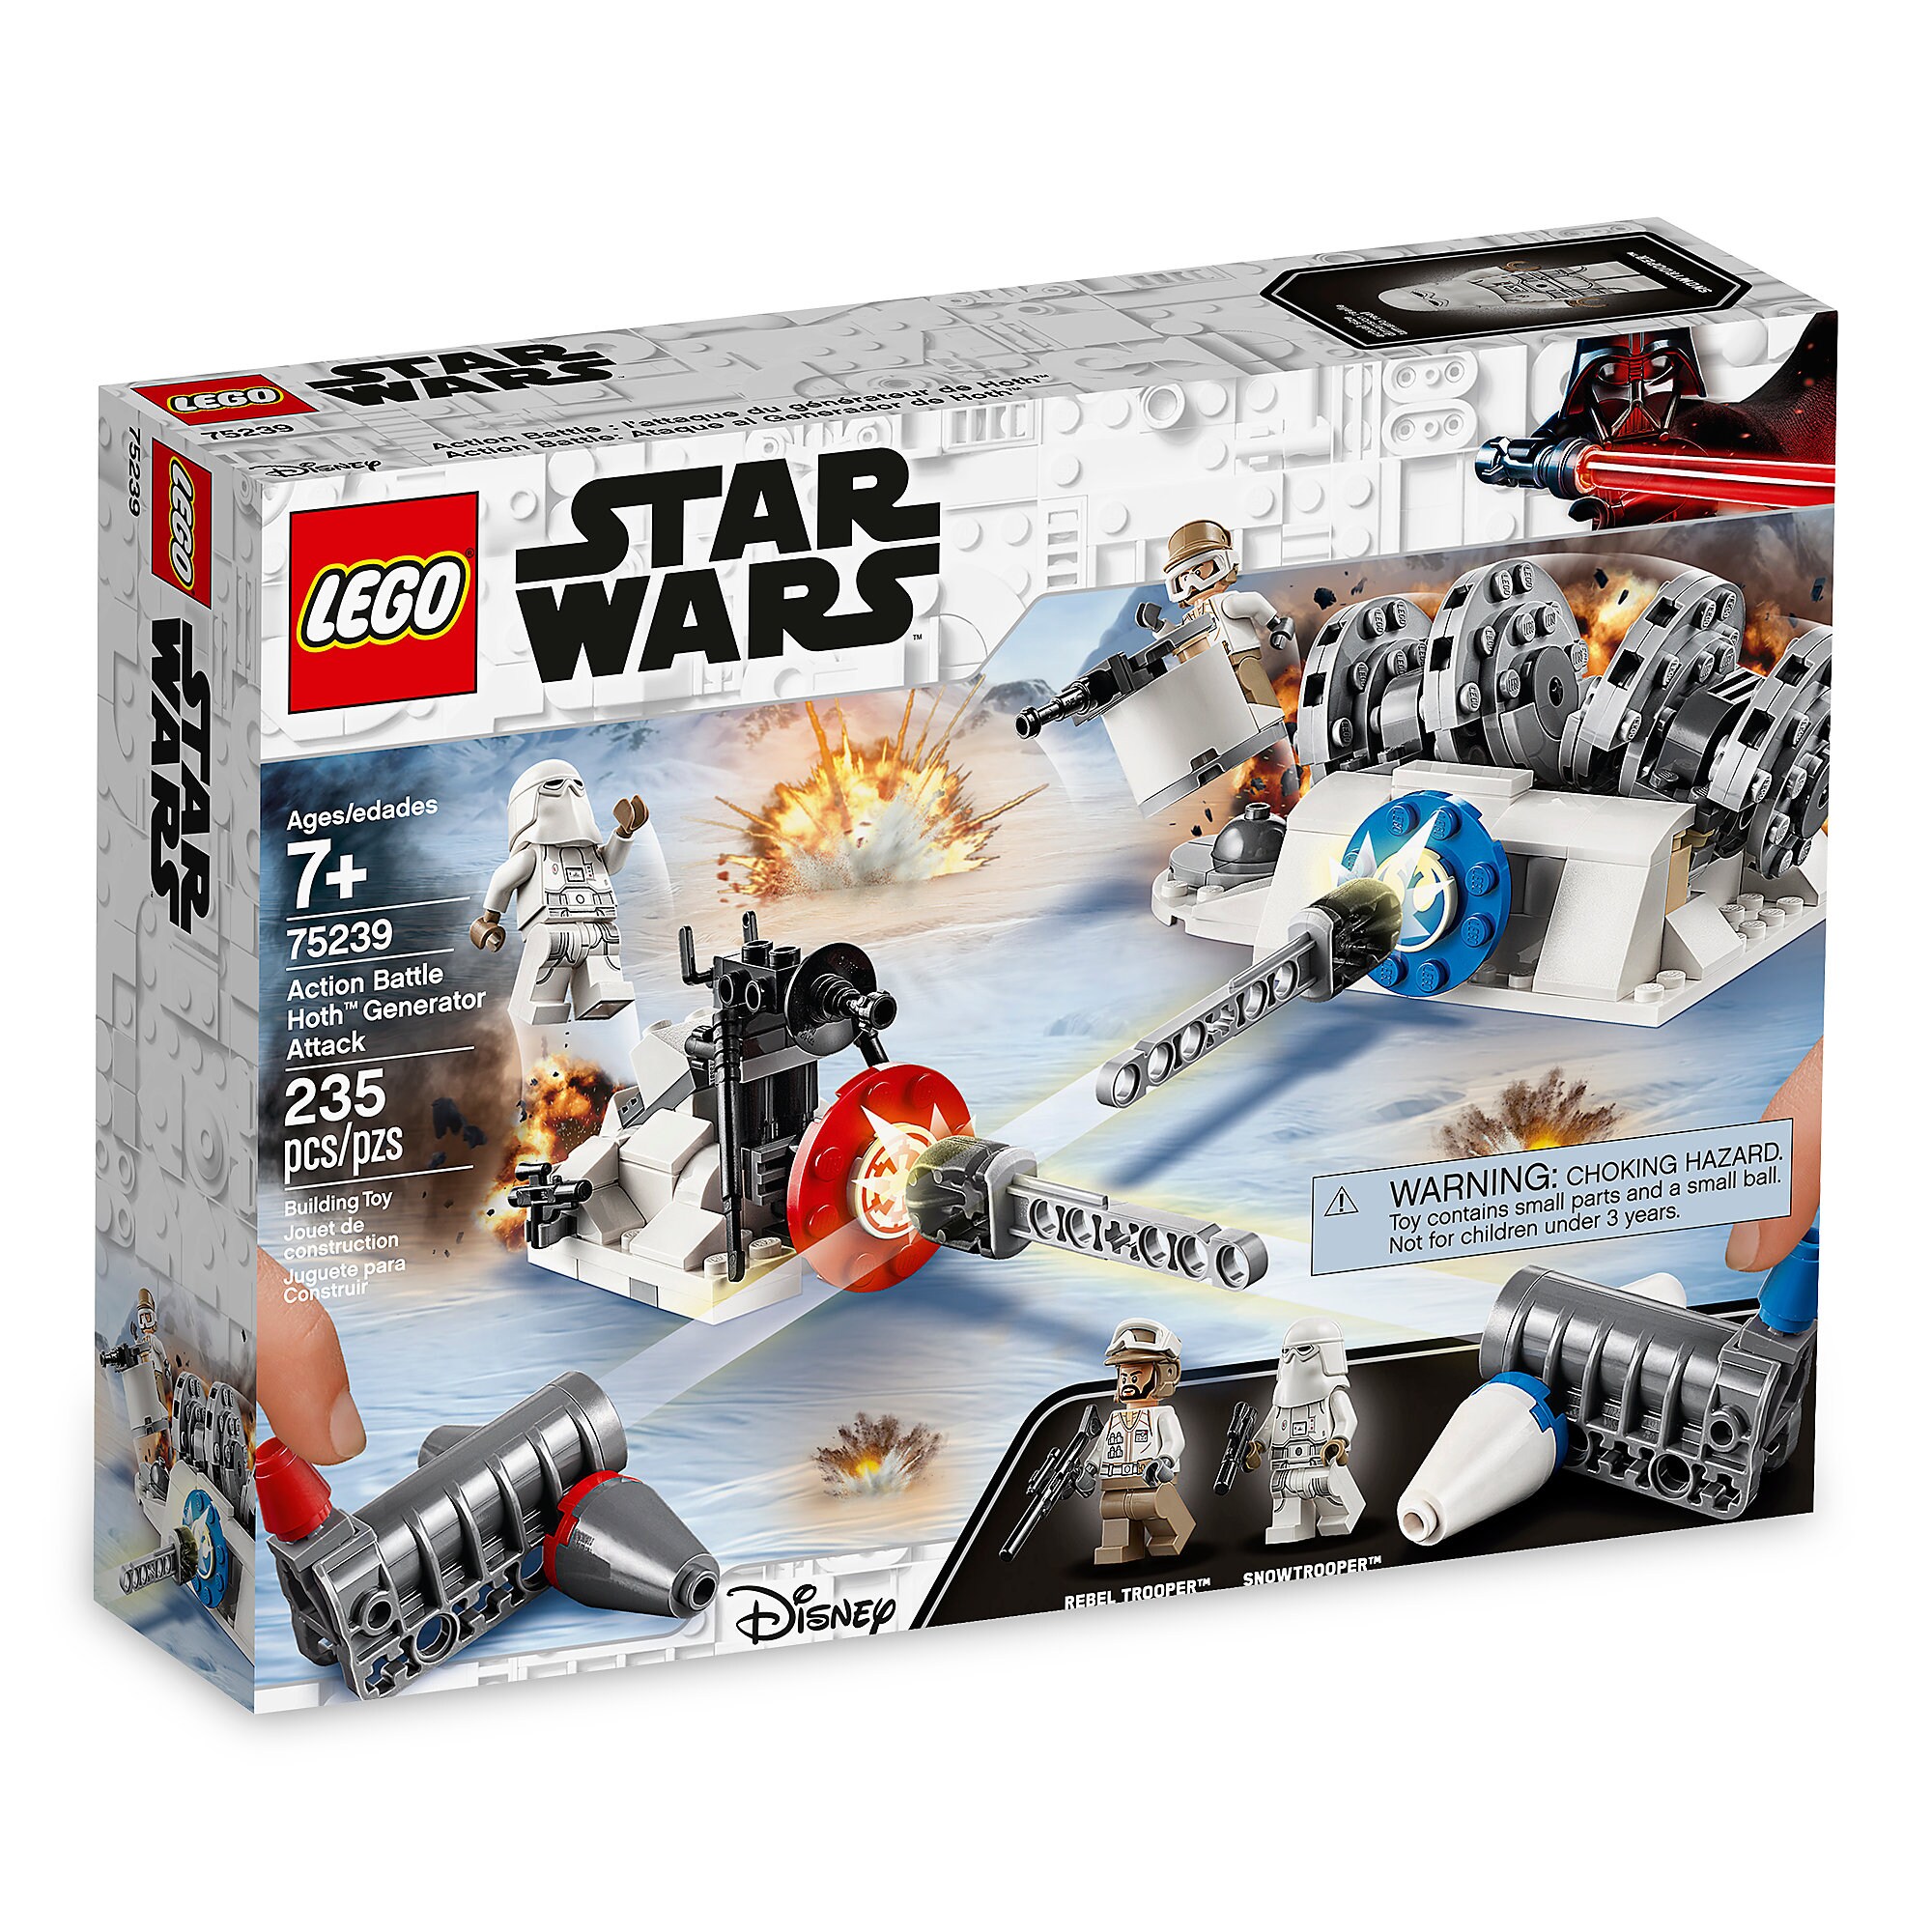 Action Battle Hoth Generator Attack Play Set by LEGO - Star Wars: The Empire Strikes Back